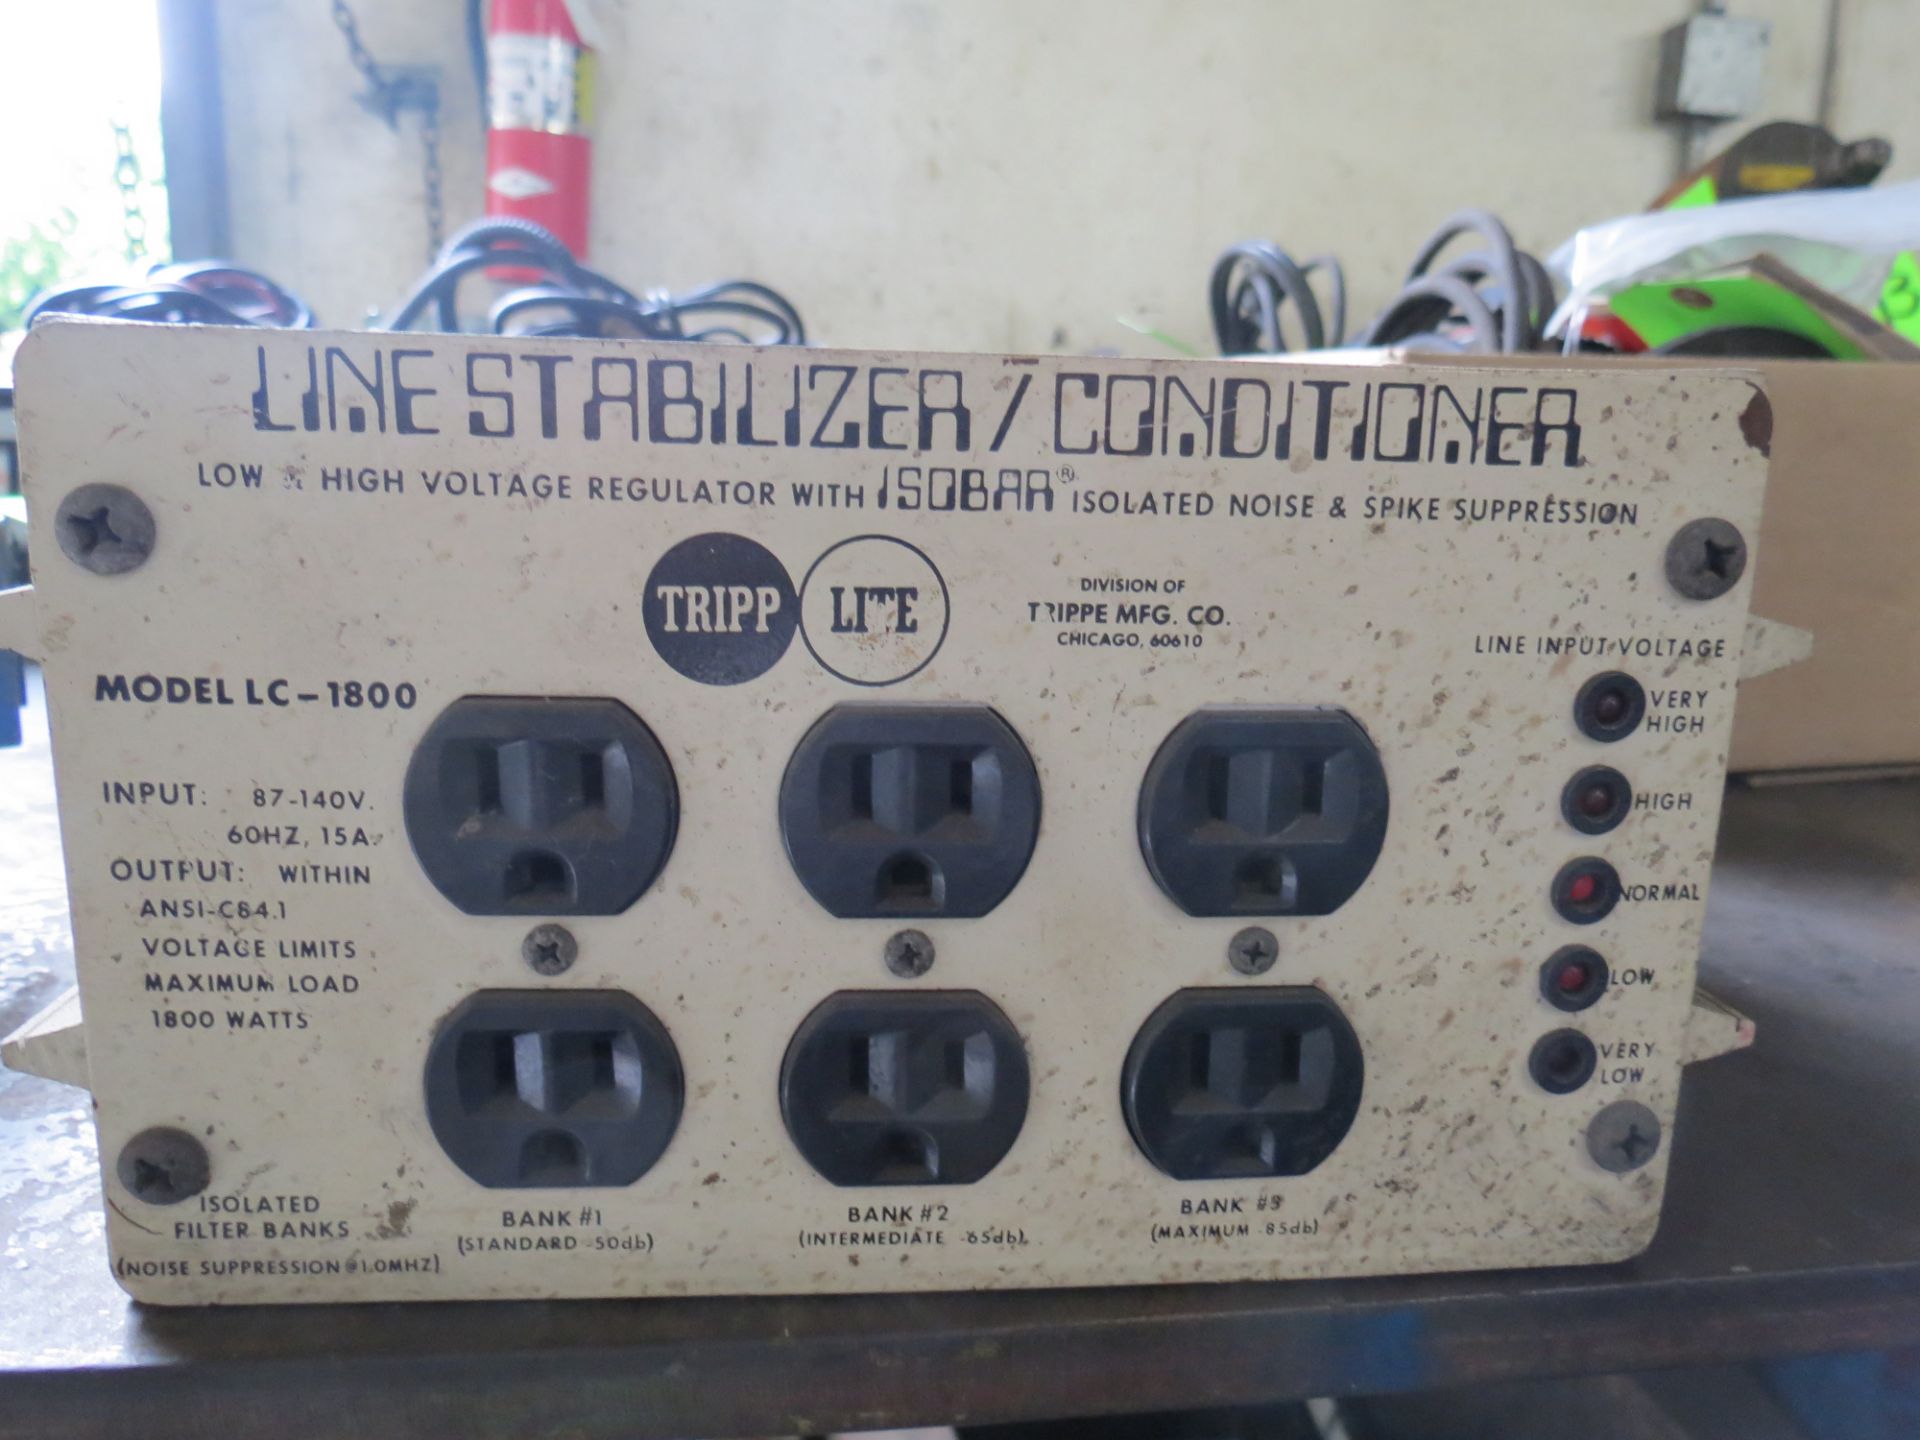 TRIPPLITE MODEL LC-1800, LINE STABALIZER / CONDITIONER, 6-OUTLETS - Image 2 of 2